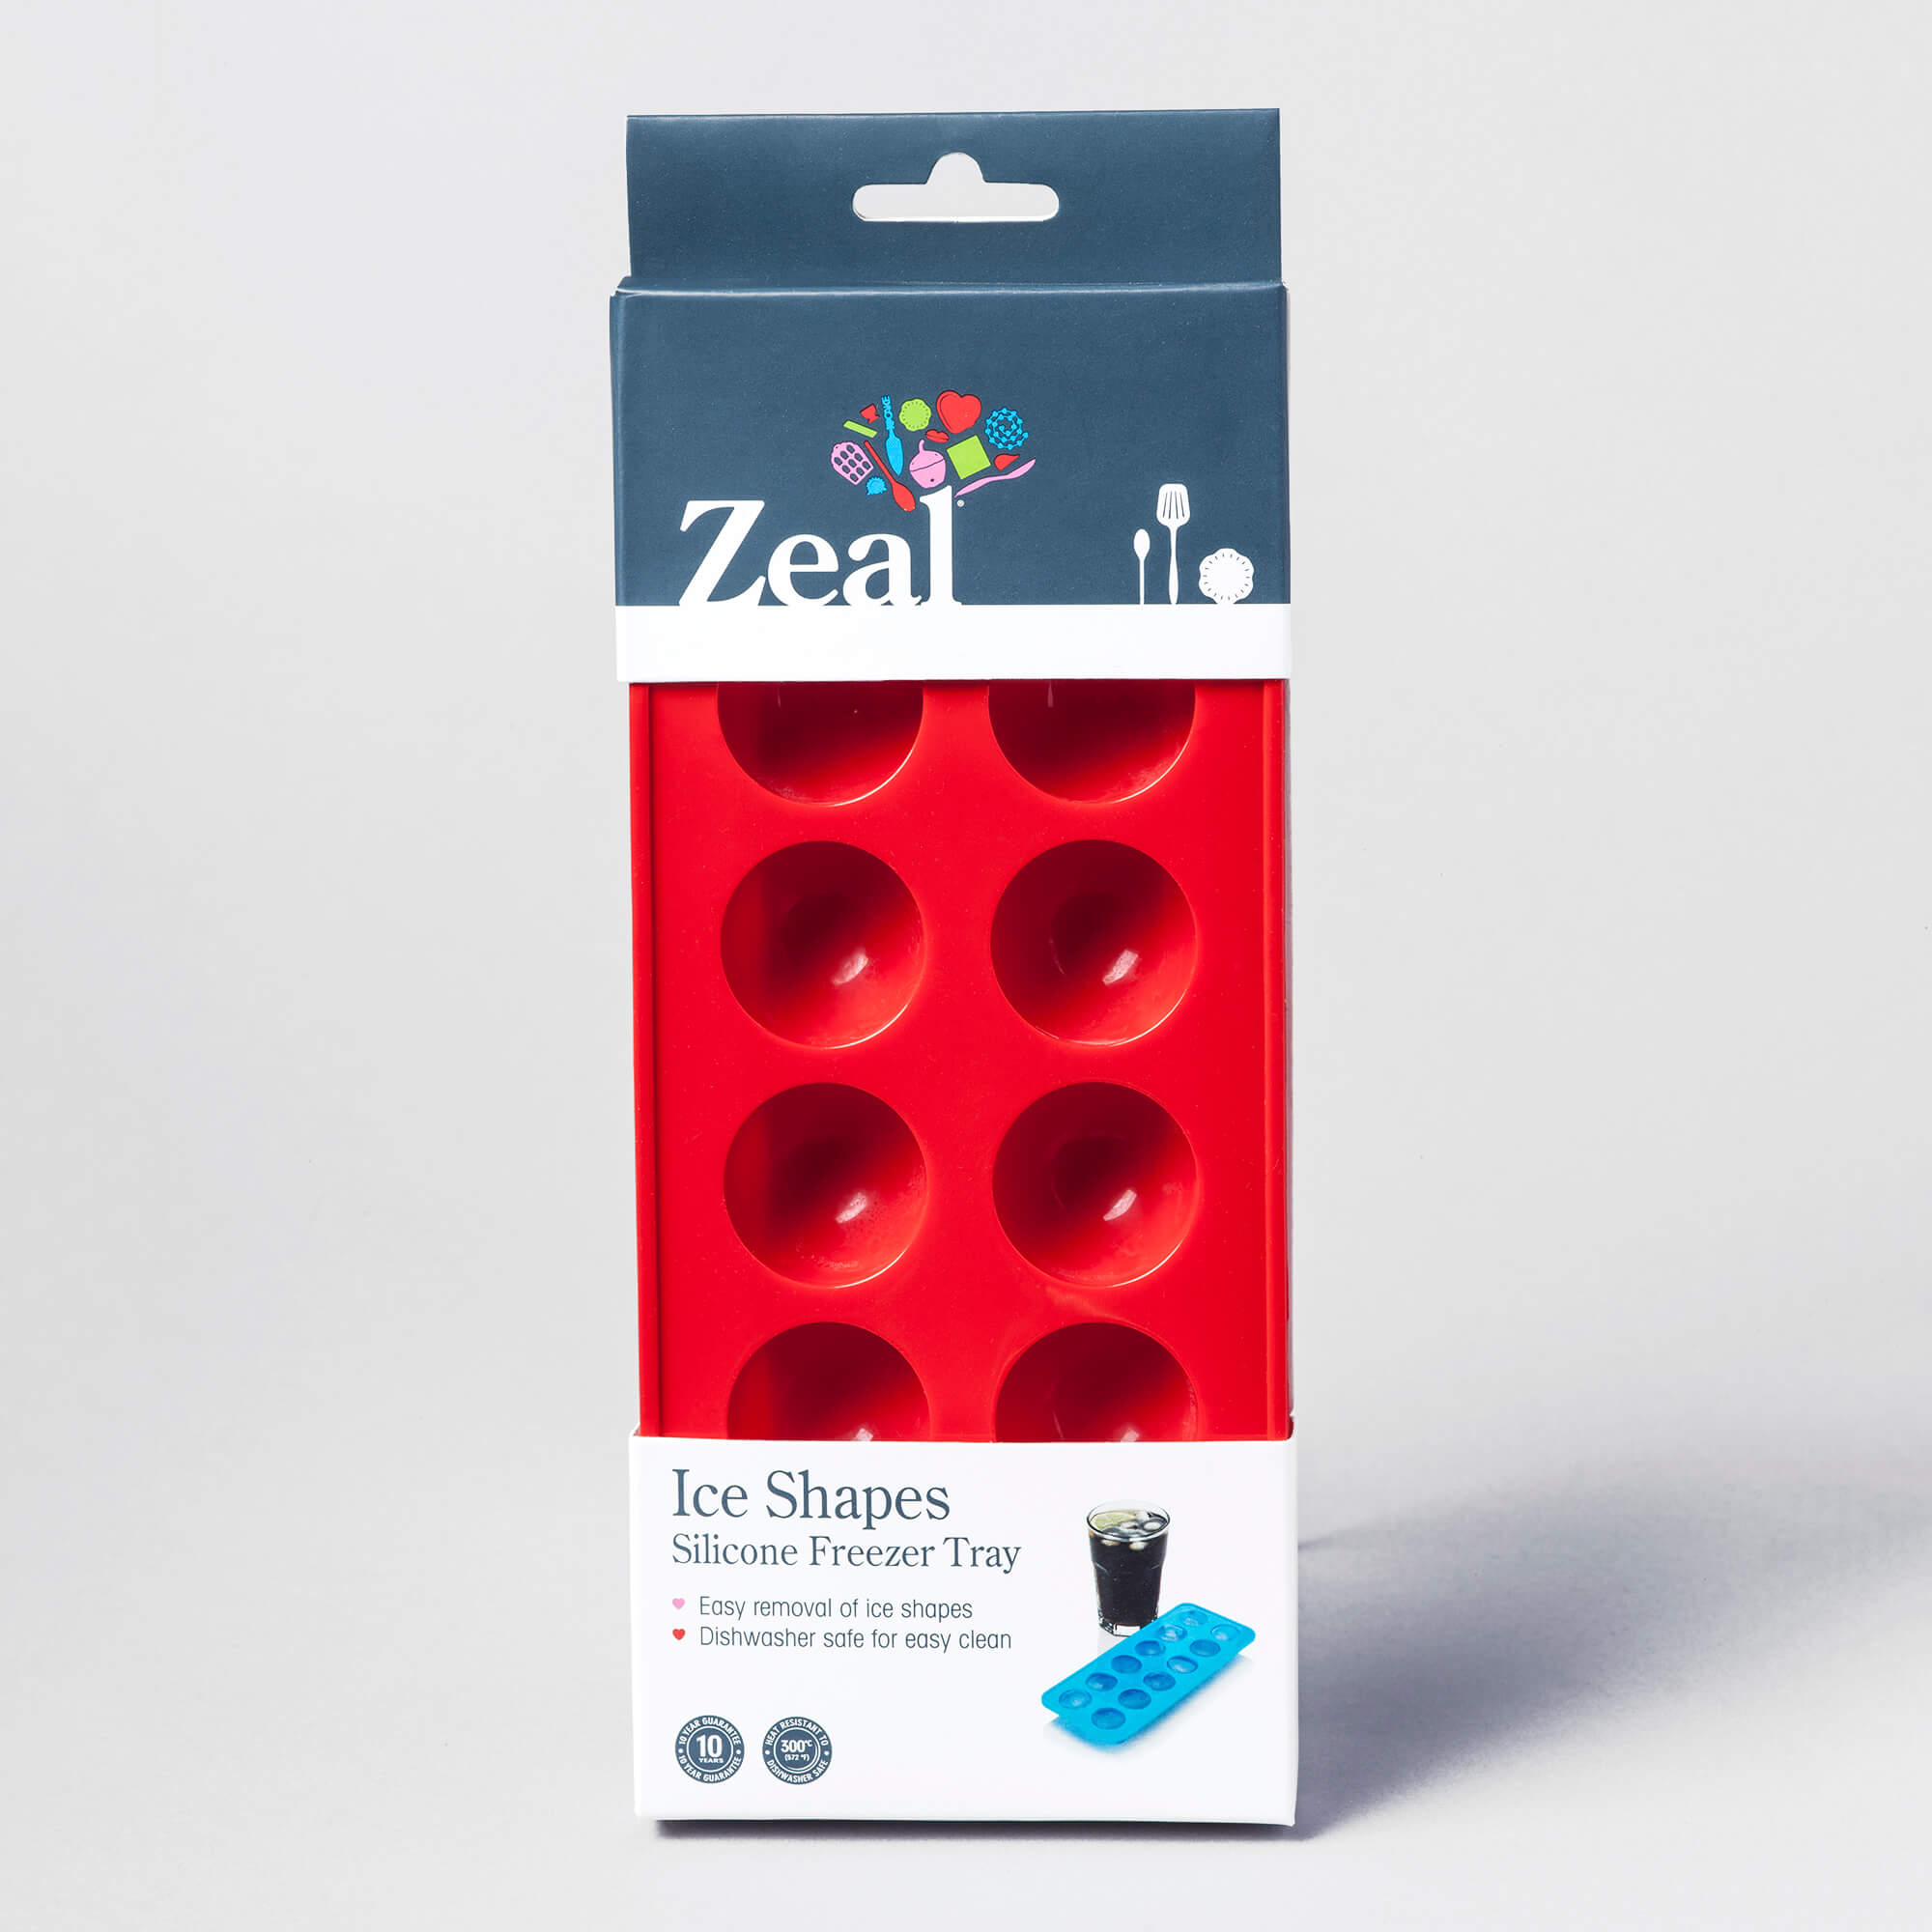 Zeal Silicone Round Ice Cube Tray in packaging